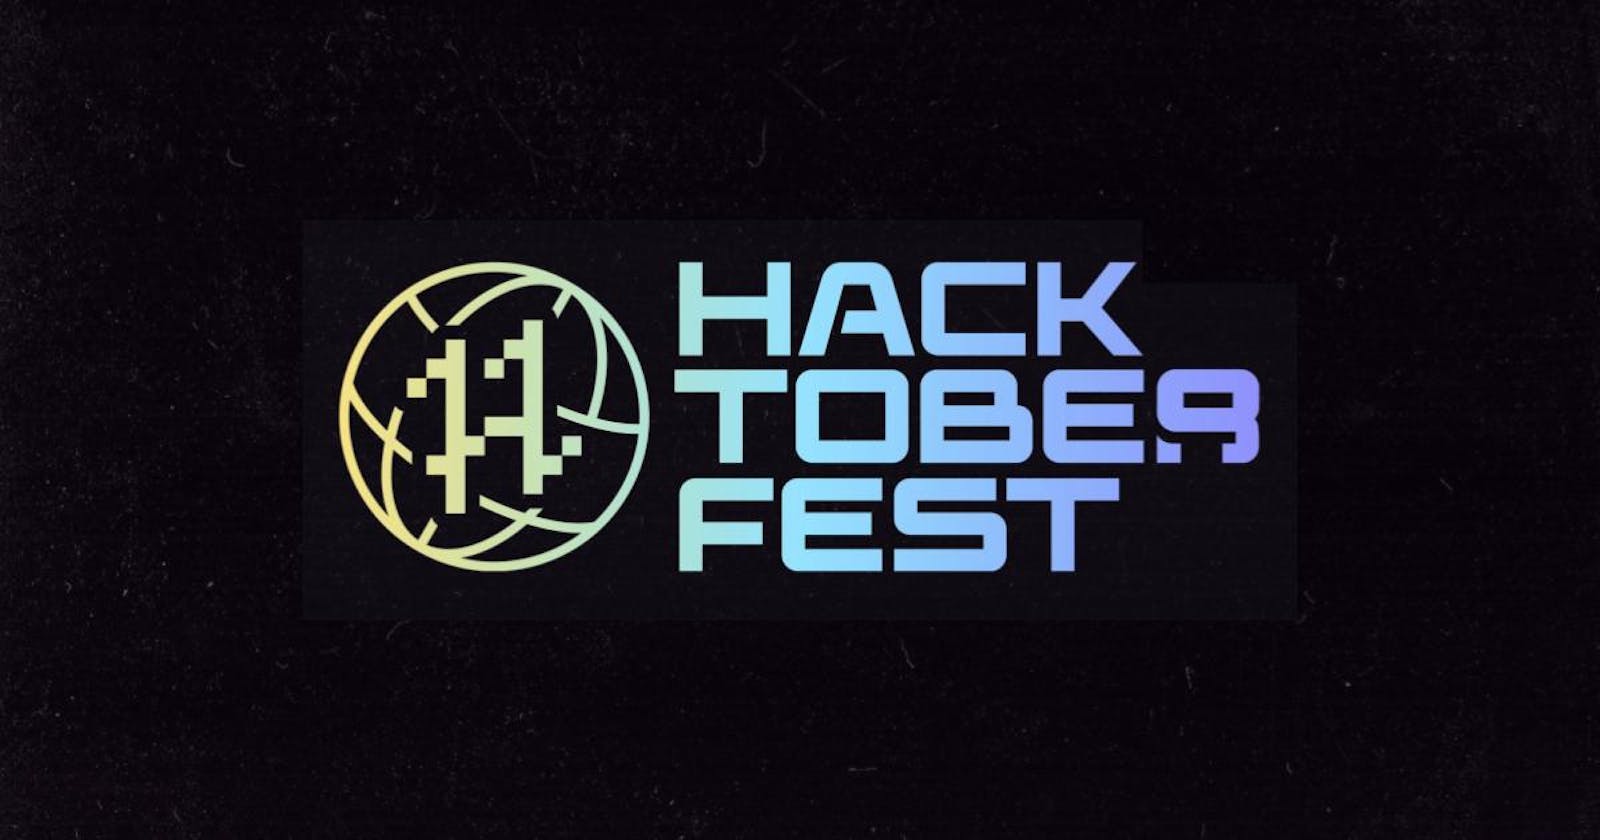 Everything about HacktoberFest ✨